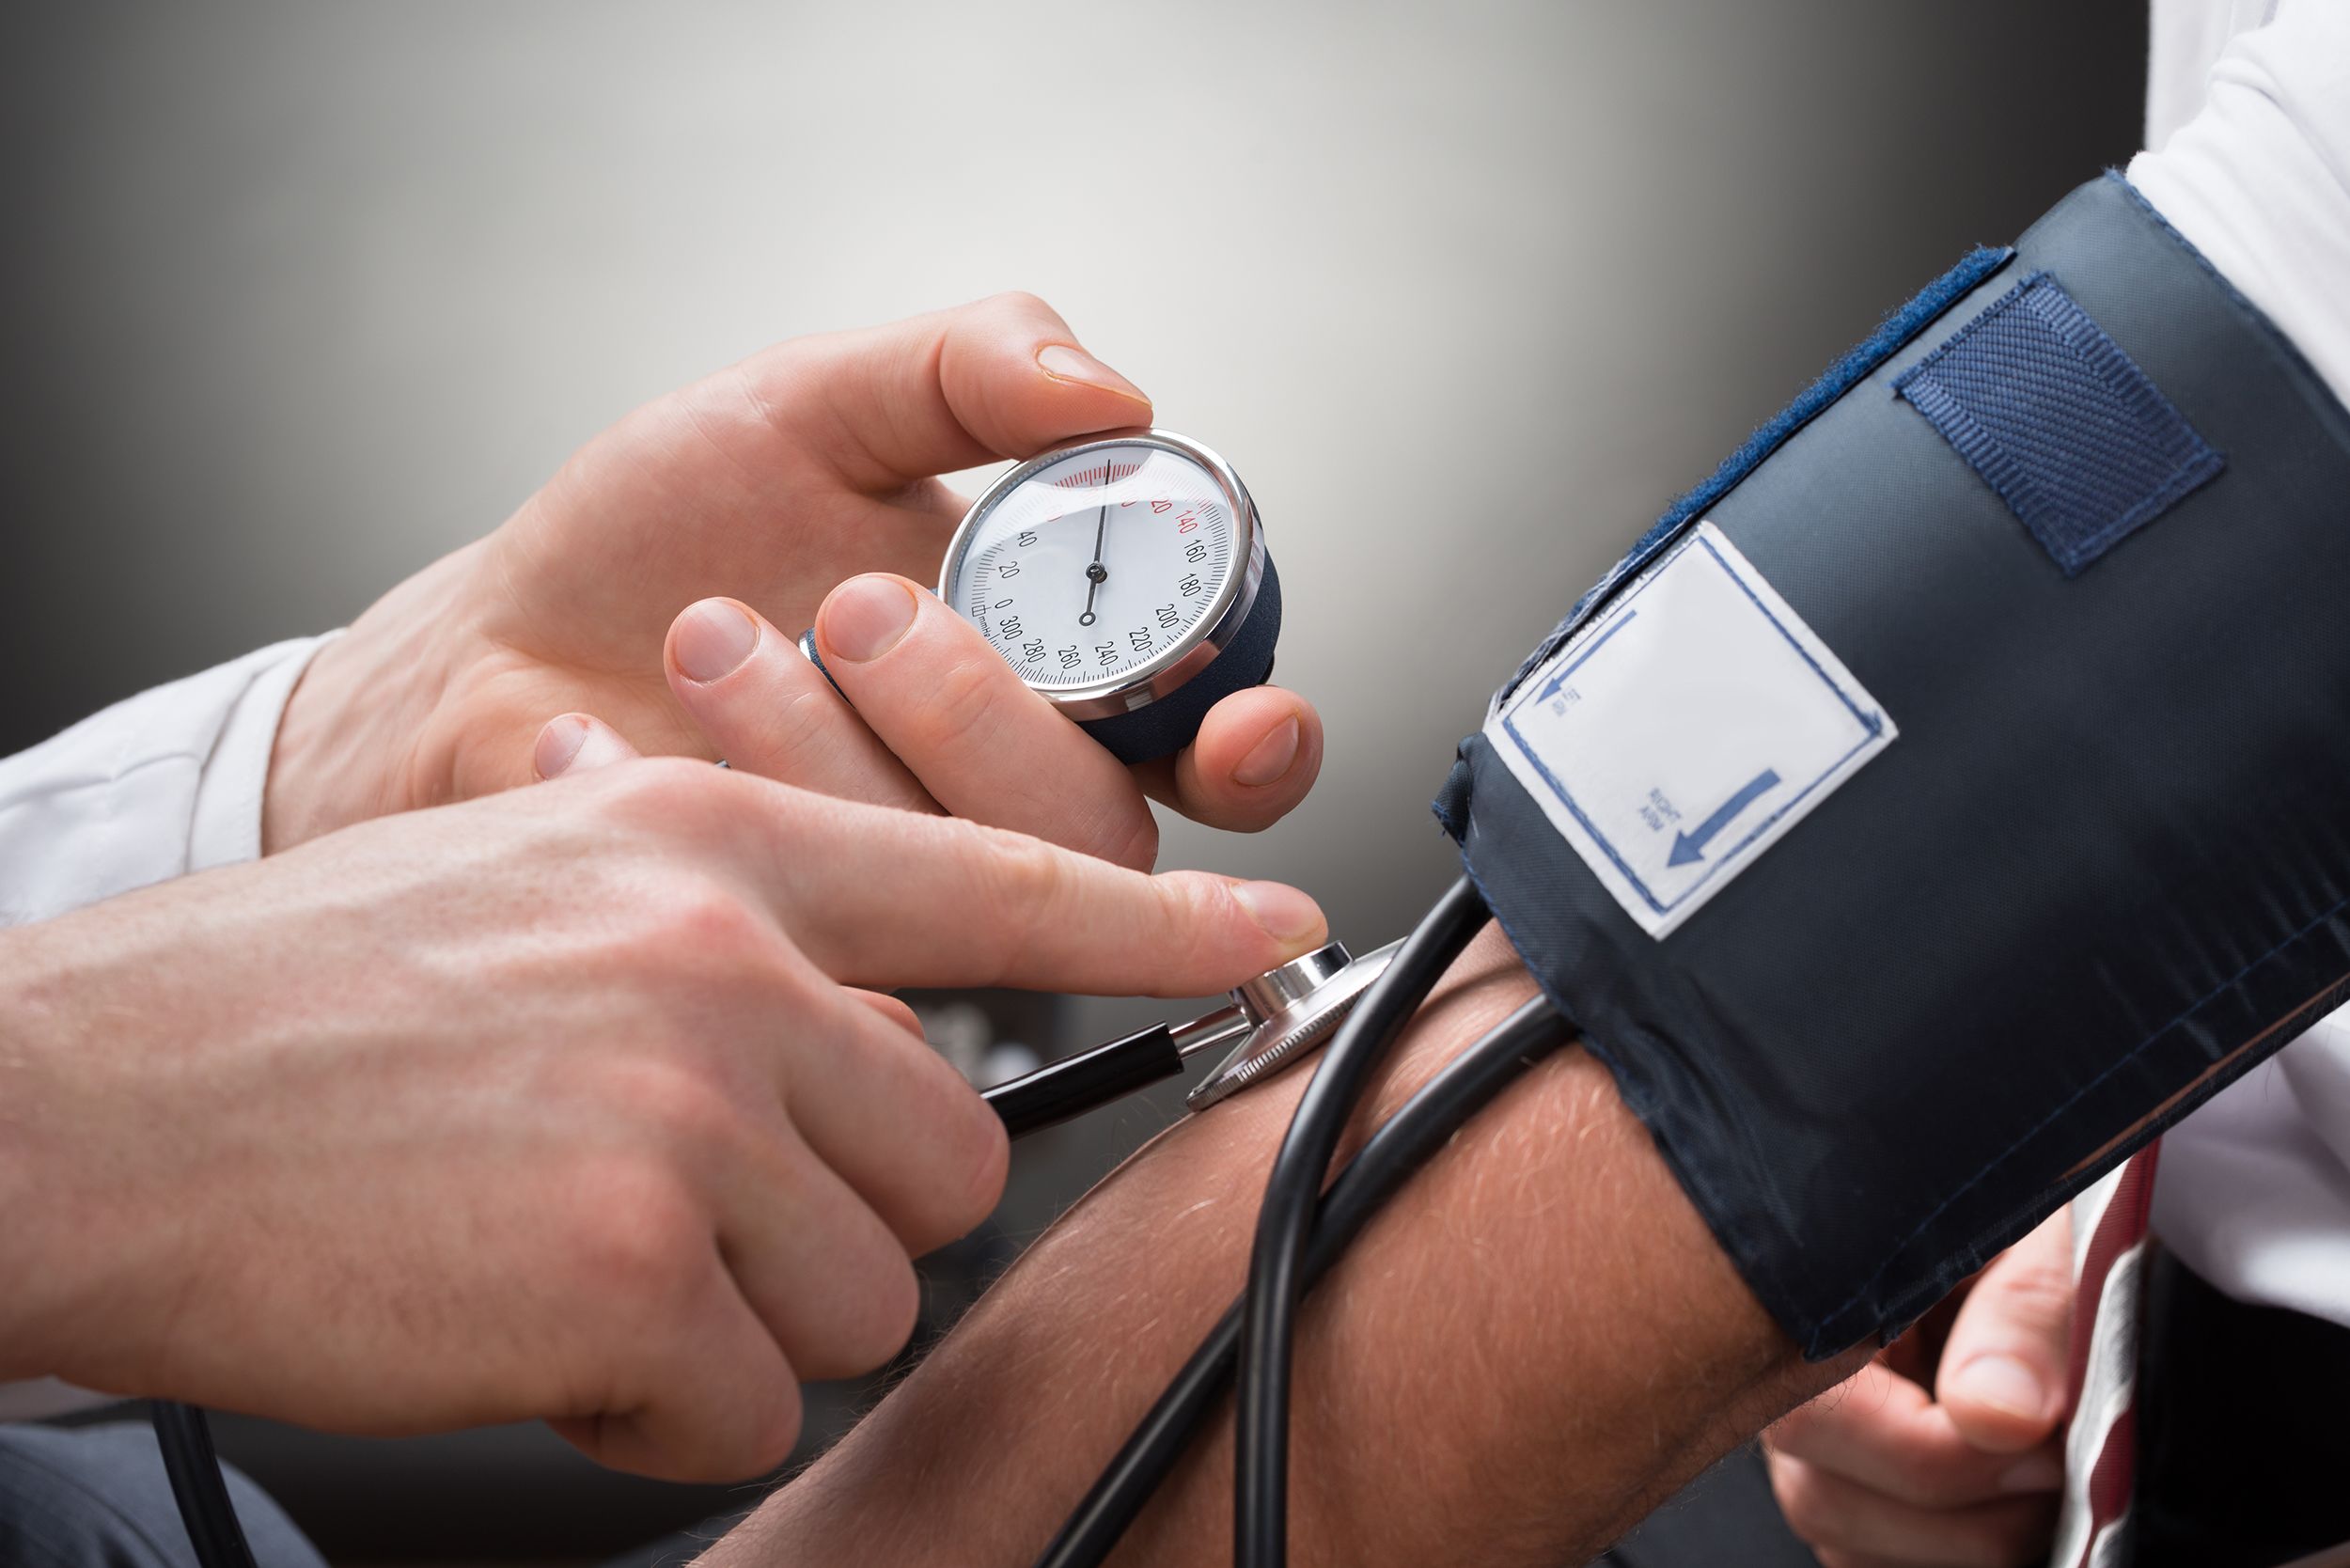 One-size-fits-all blood pressure cuffs 'strikingly inaccurate